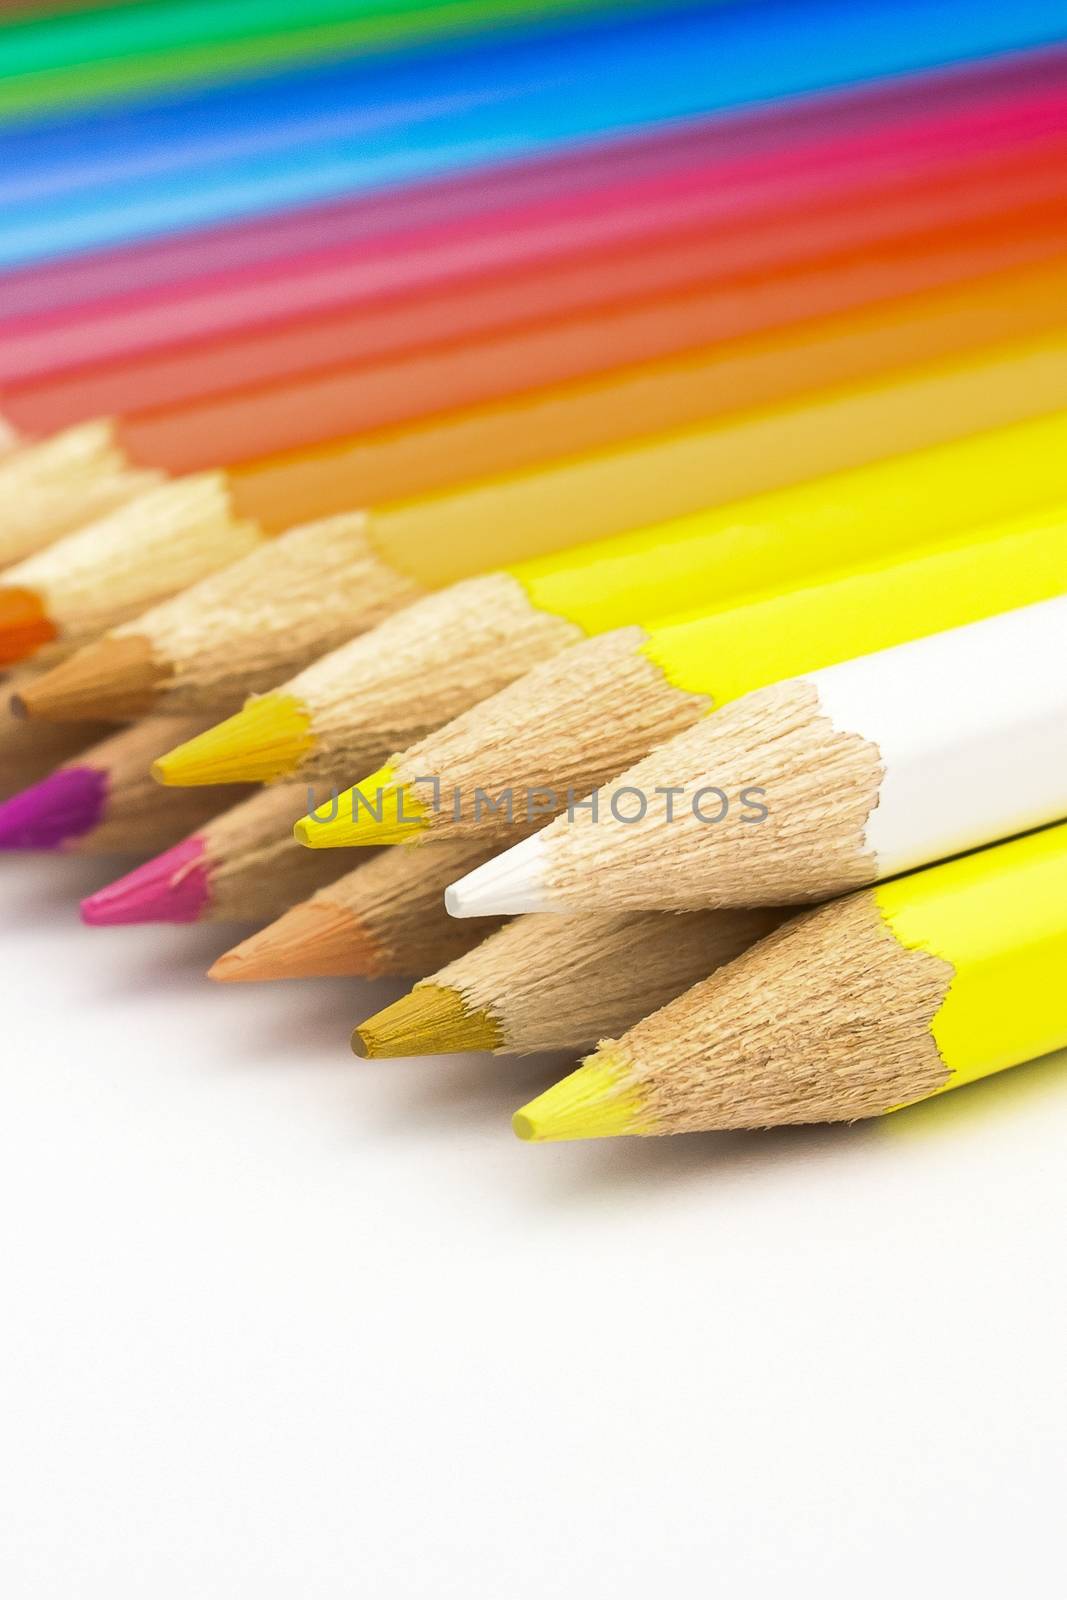 detail view of many colored pencils on white background